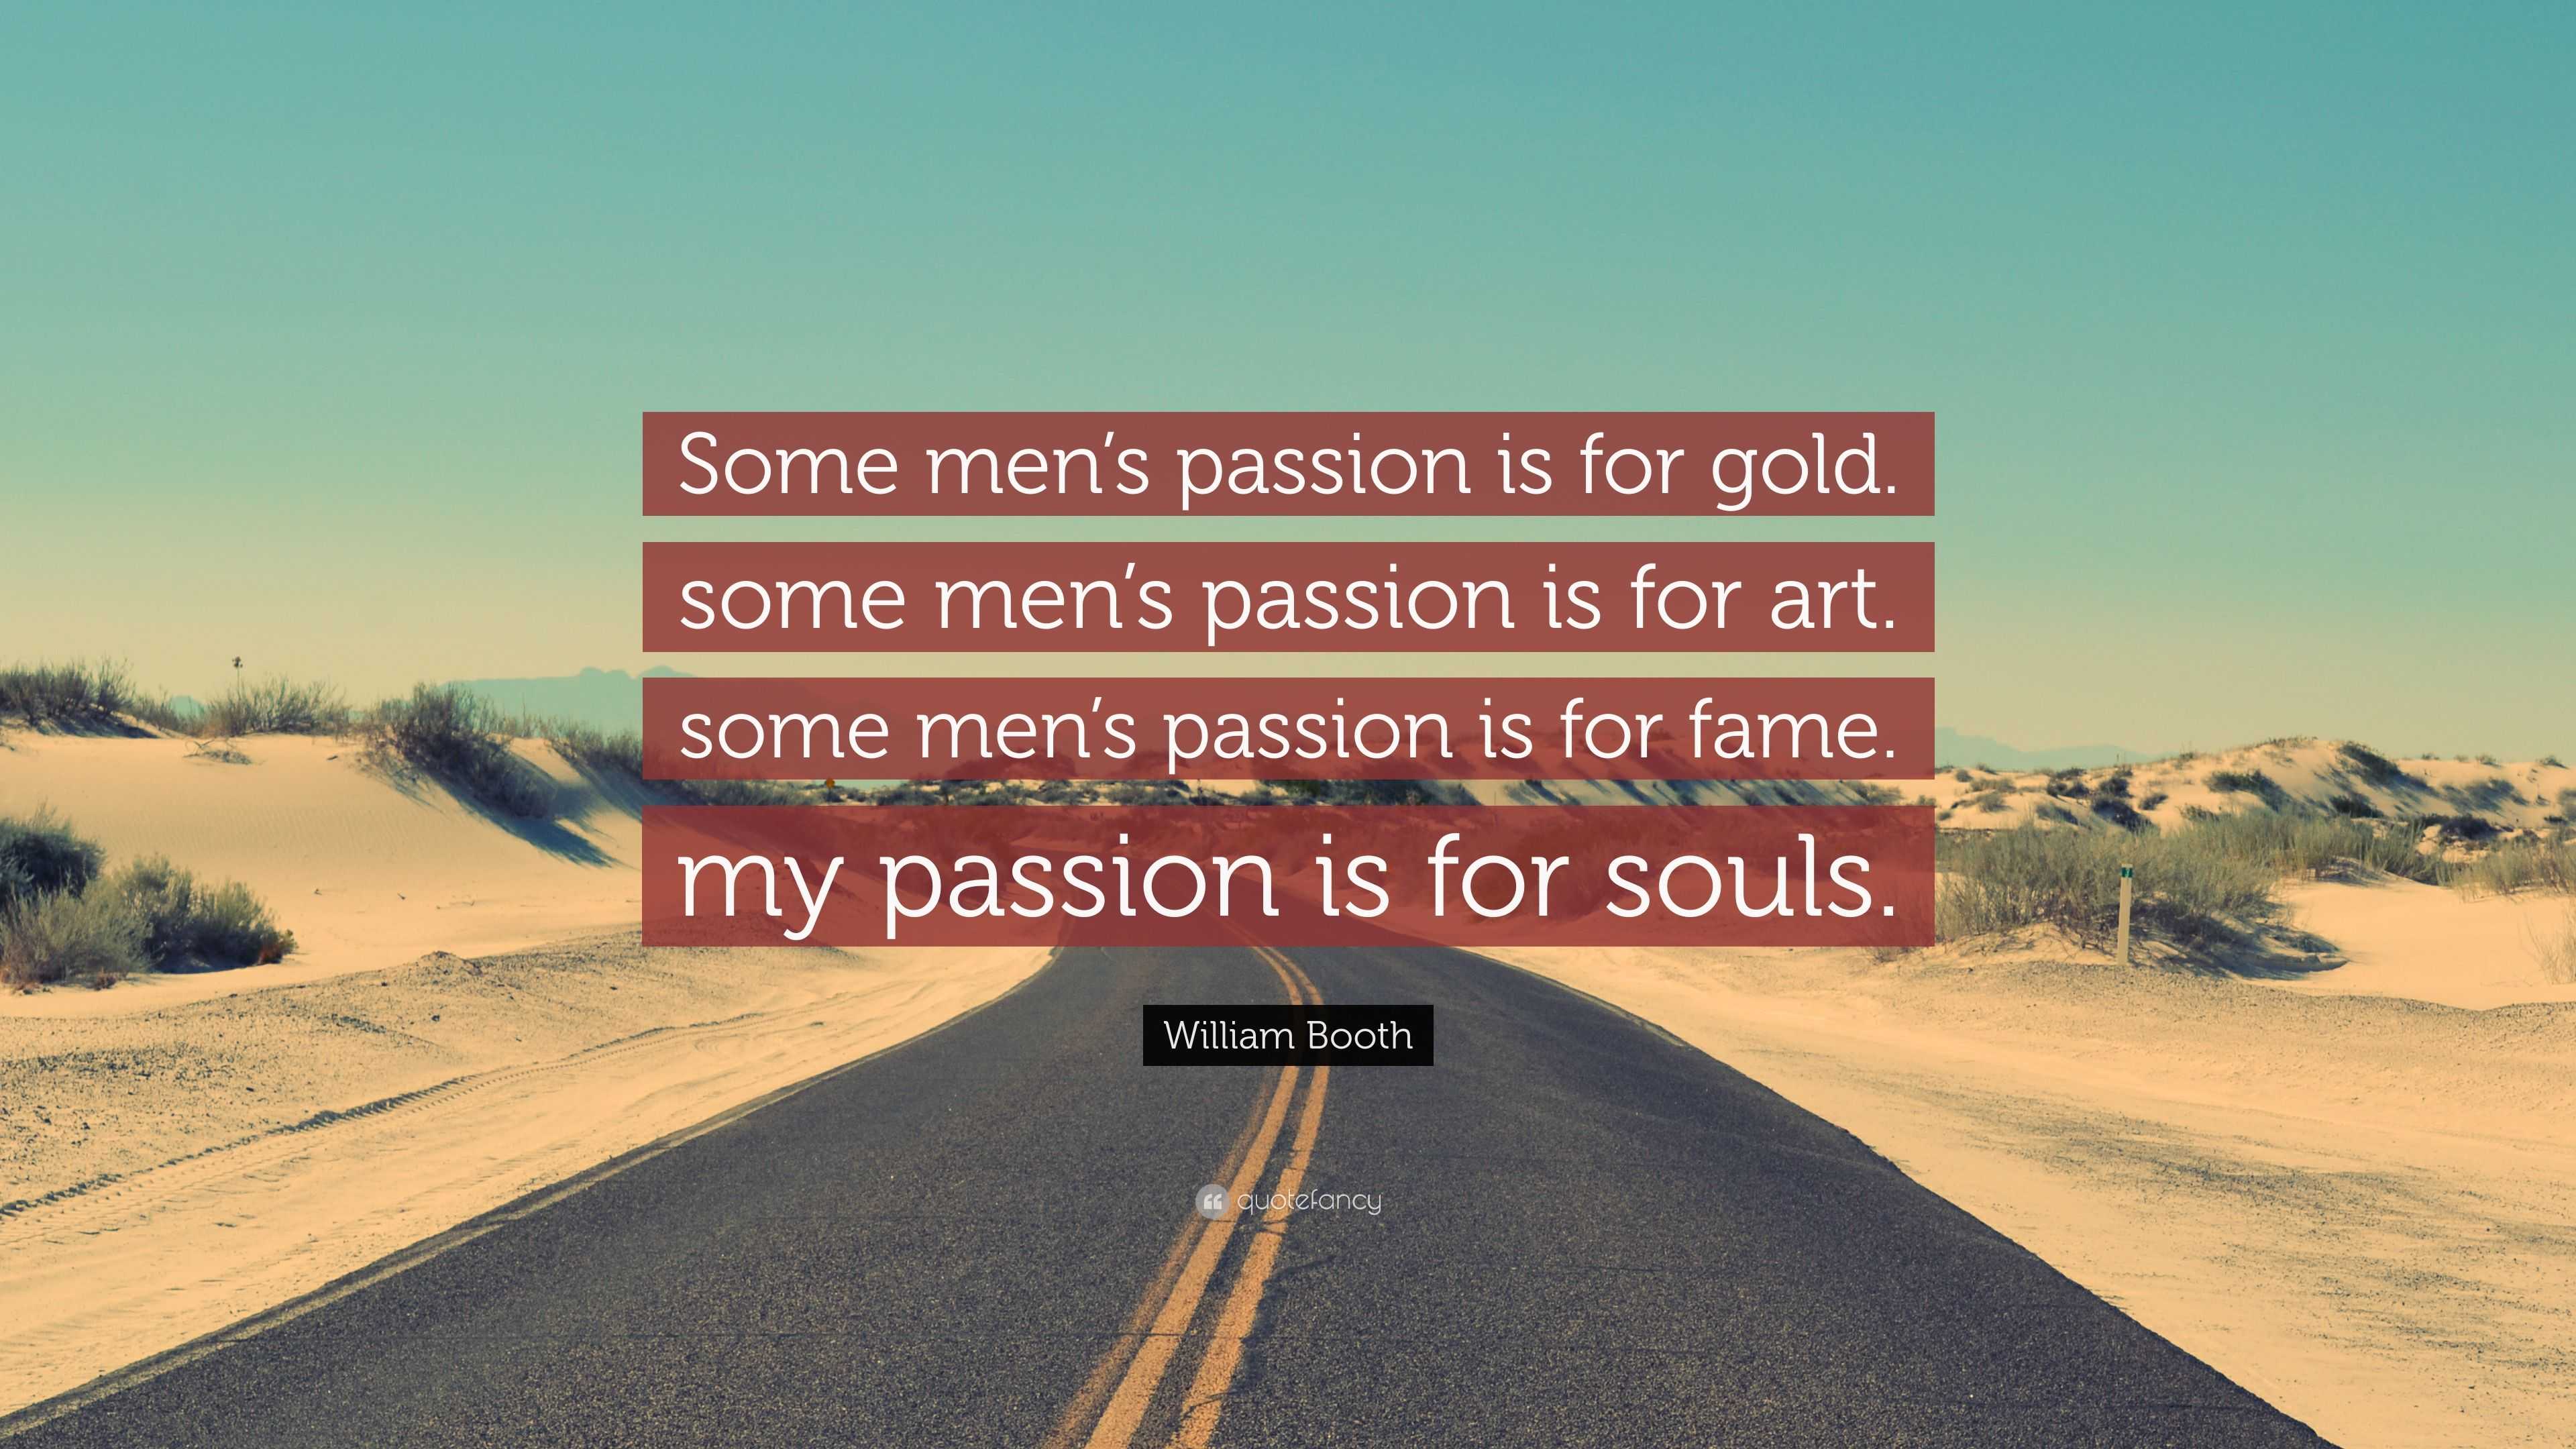 William Booth Quote “some Men S Passion Is For Gold Some Men S Passion Is For Art Some Men S